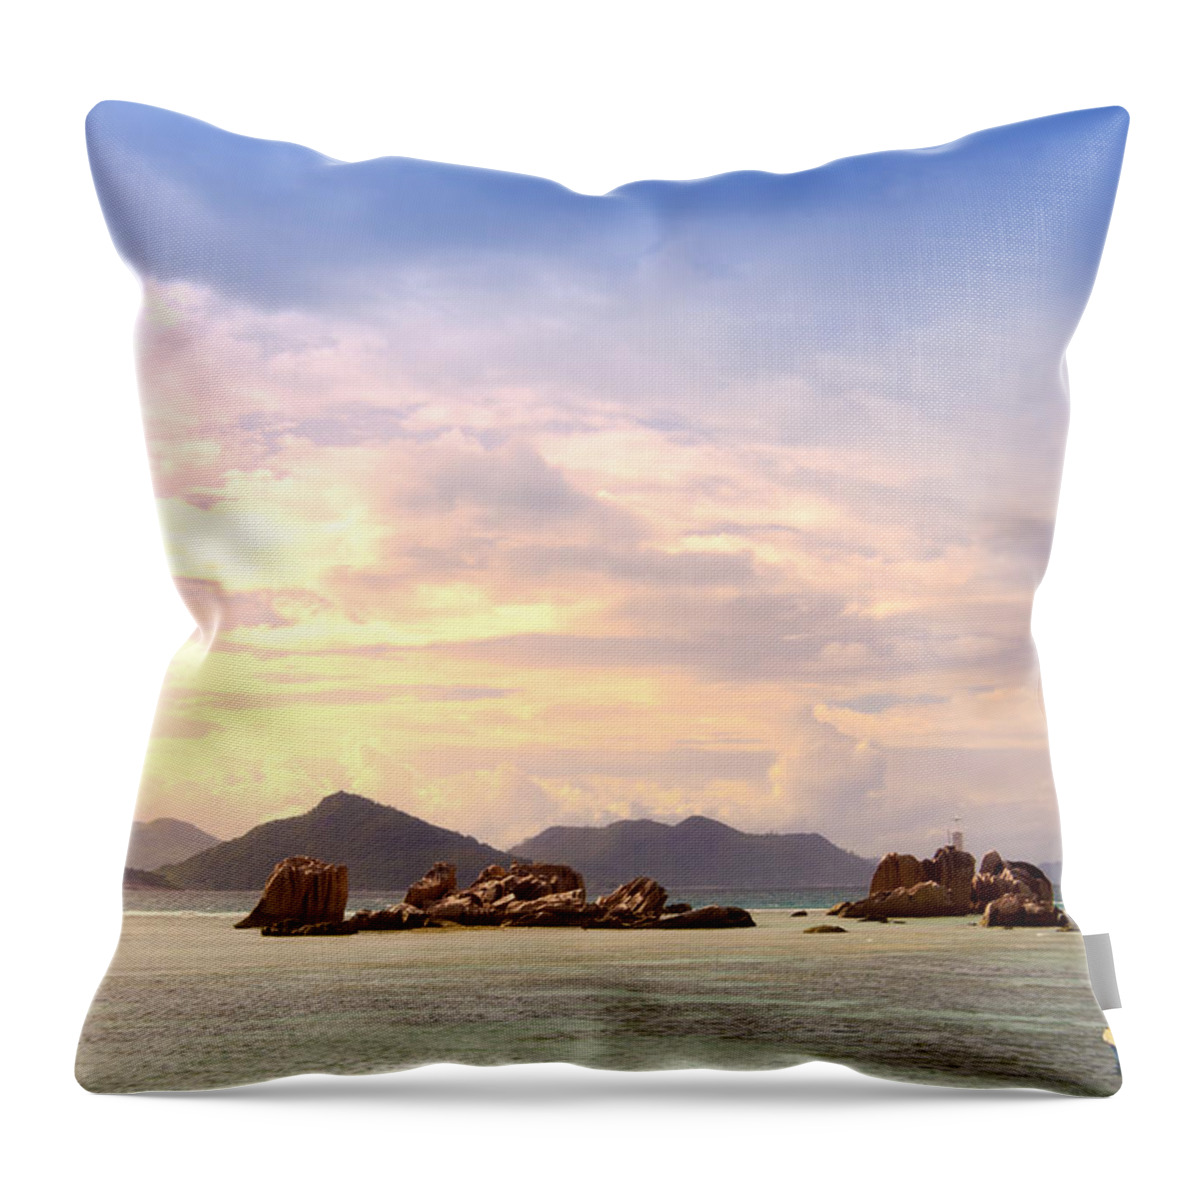 Landscape Throw Pillow featuring the photograph Lonely boat by Alexey Stiop